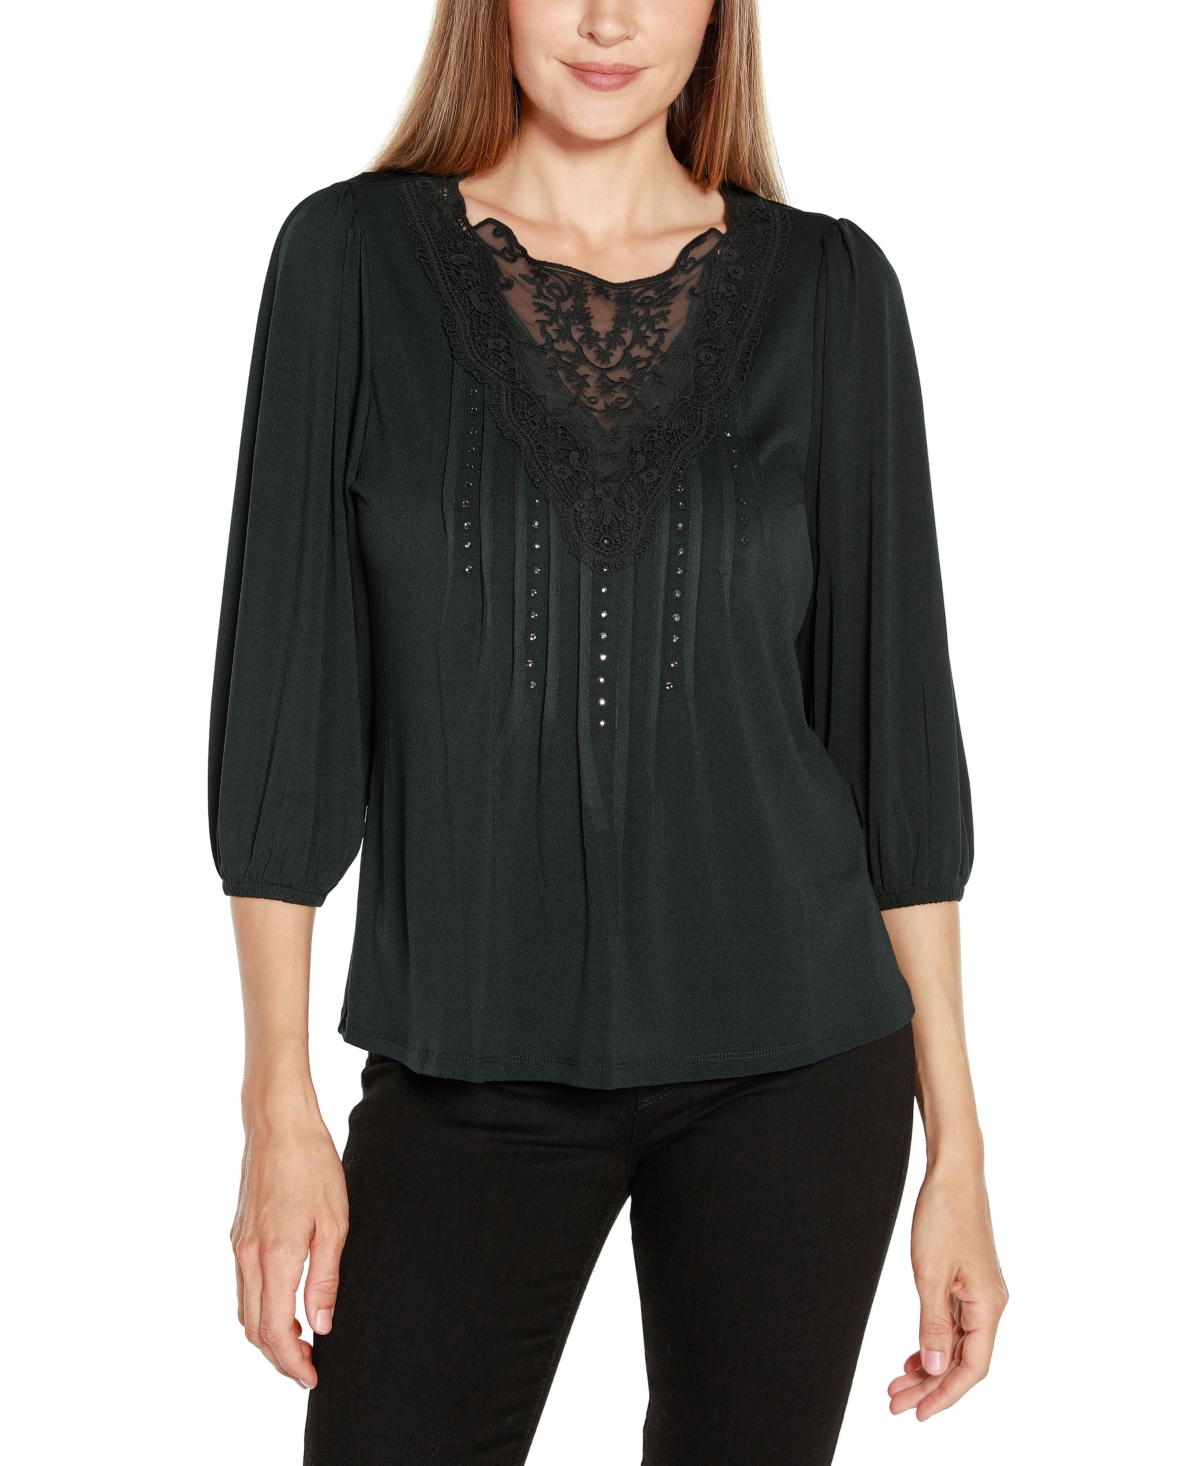 BELLDINI BLACK LABEL WOMEN'S EMBELLISHED TOP WITH LACE